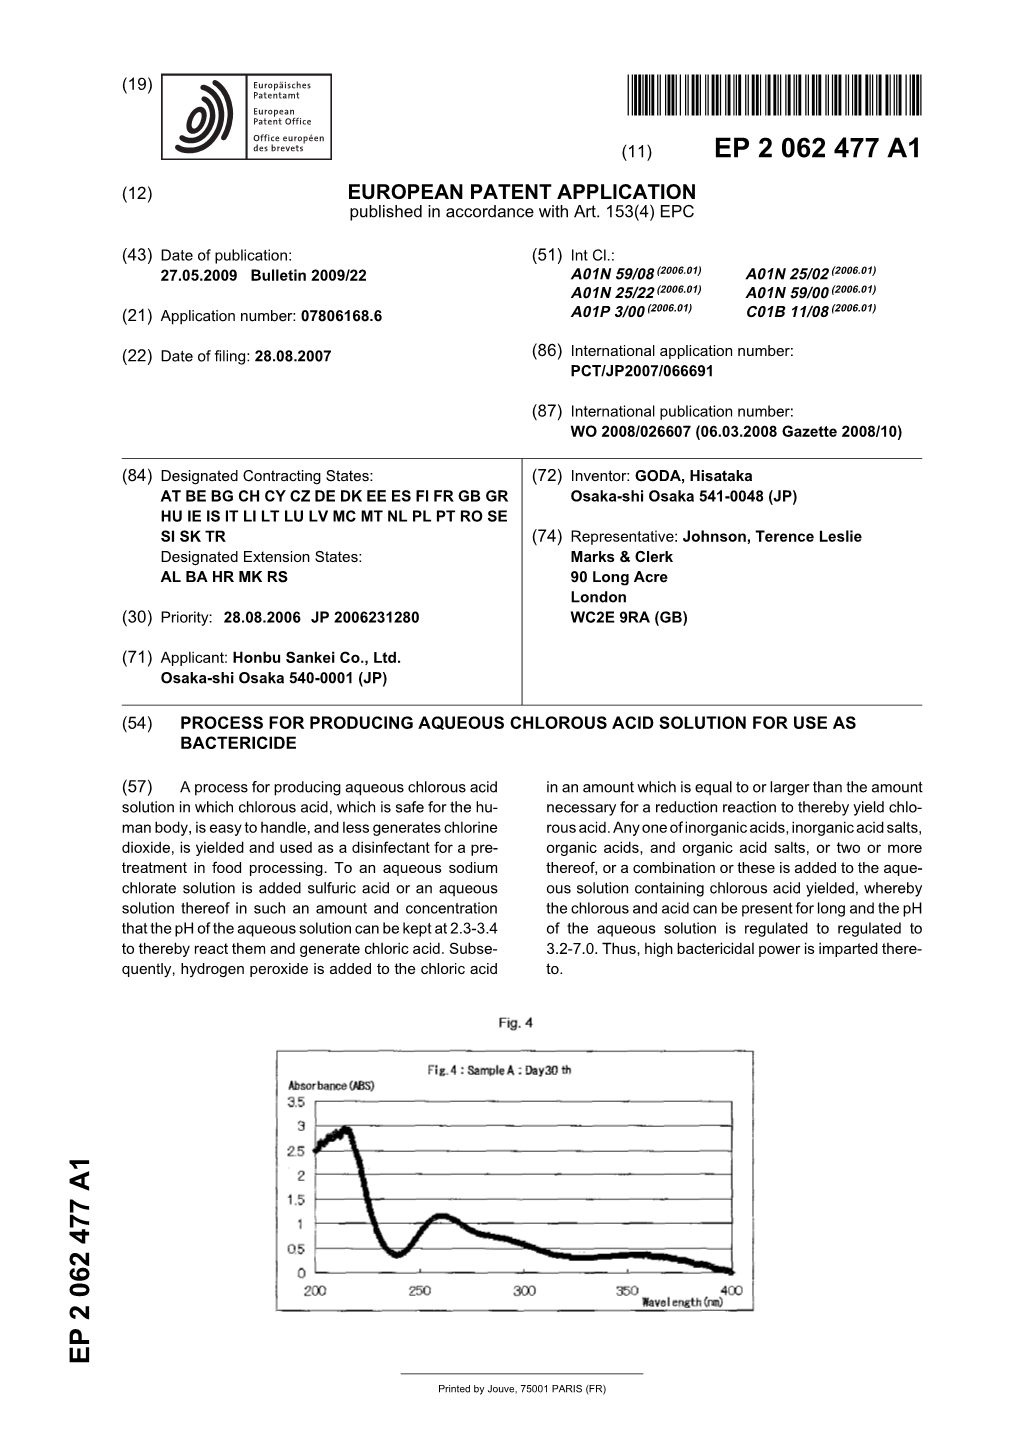 Process for Producing Aqueous Chlorous Acid Solution for Use As Bactericide